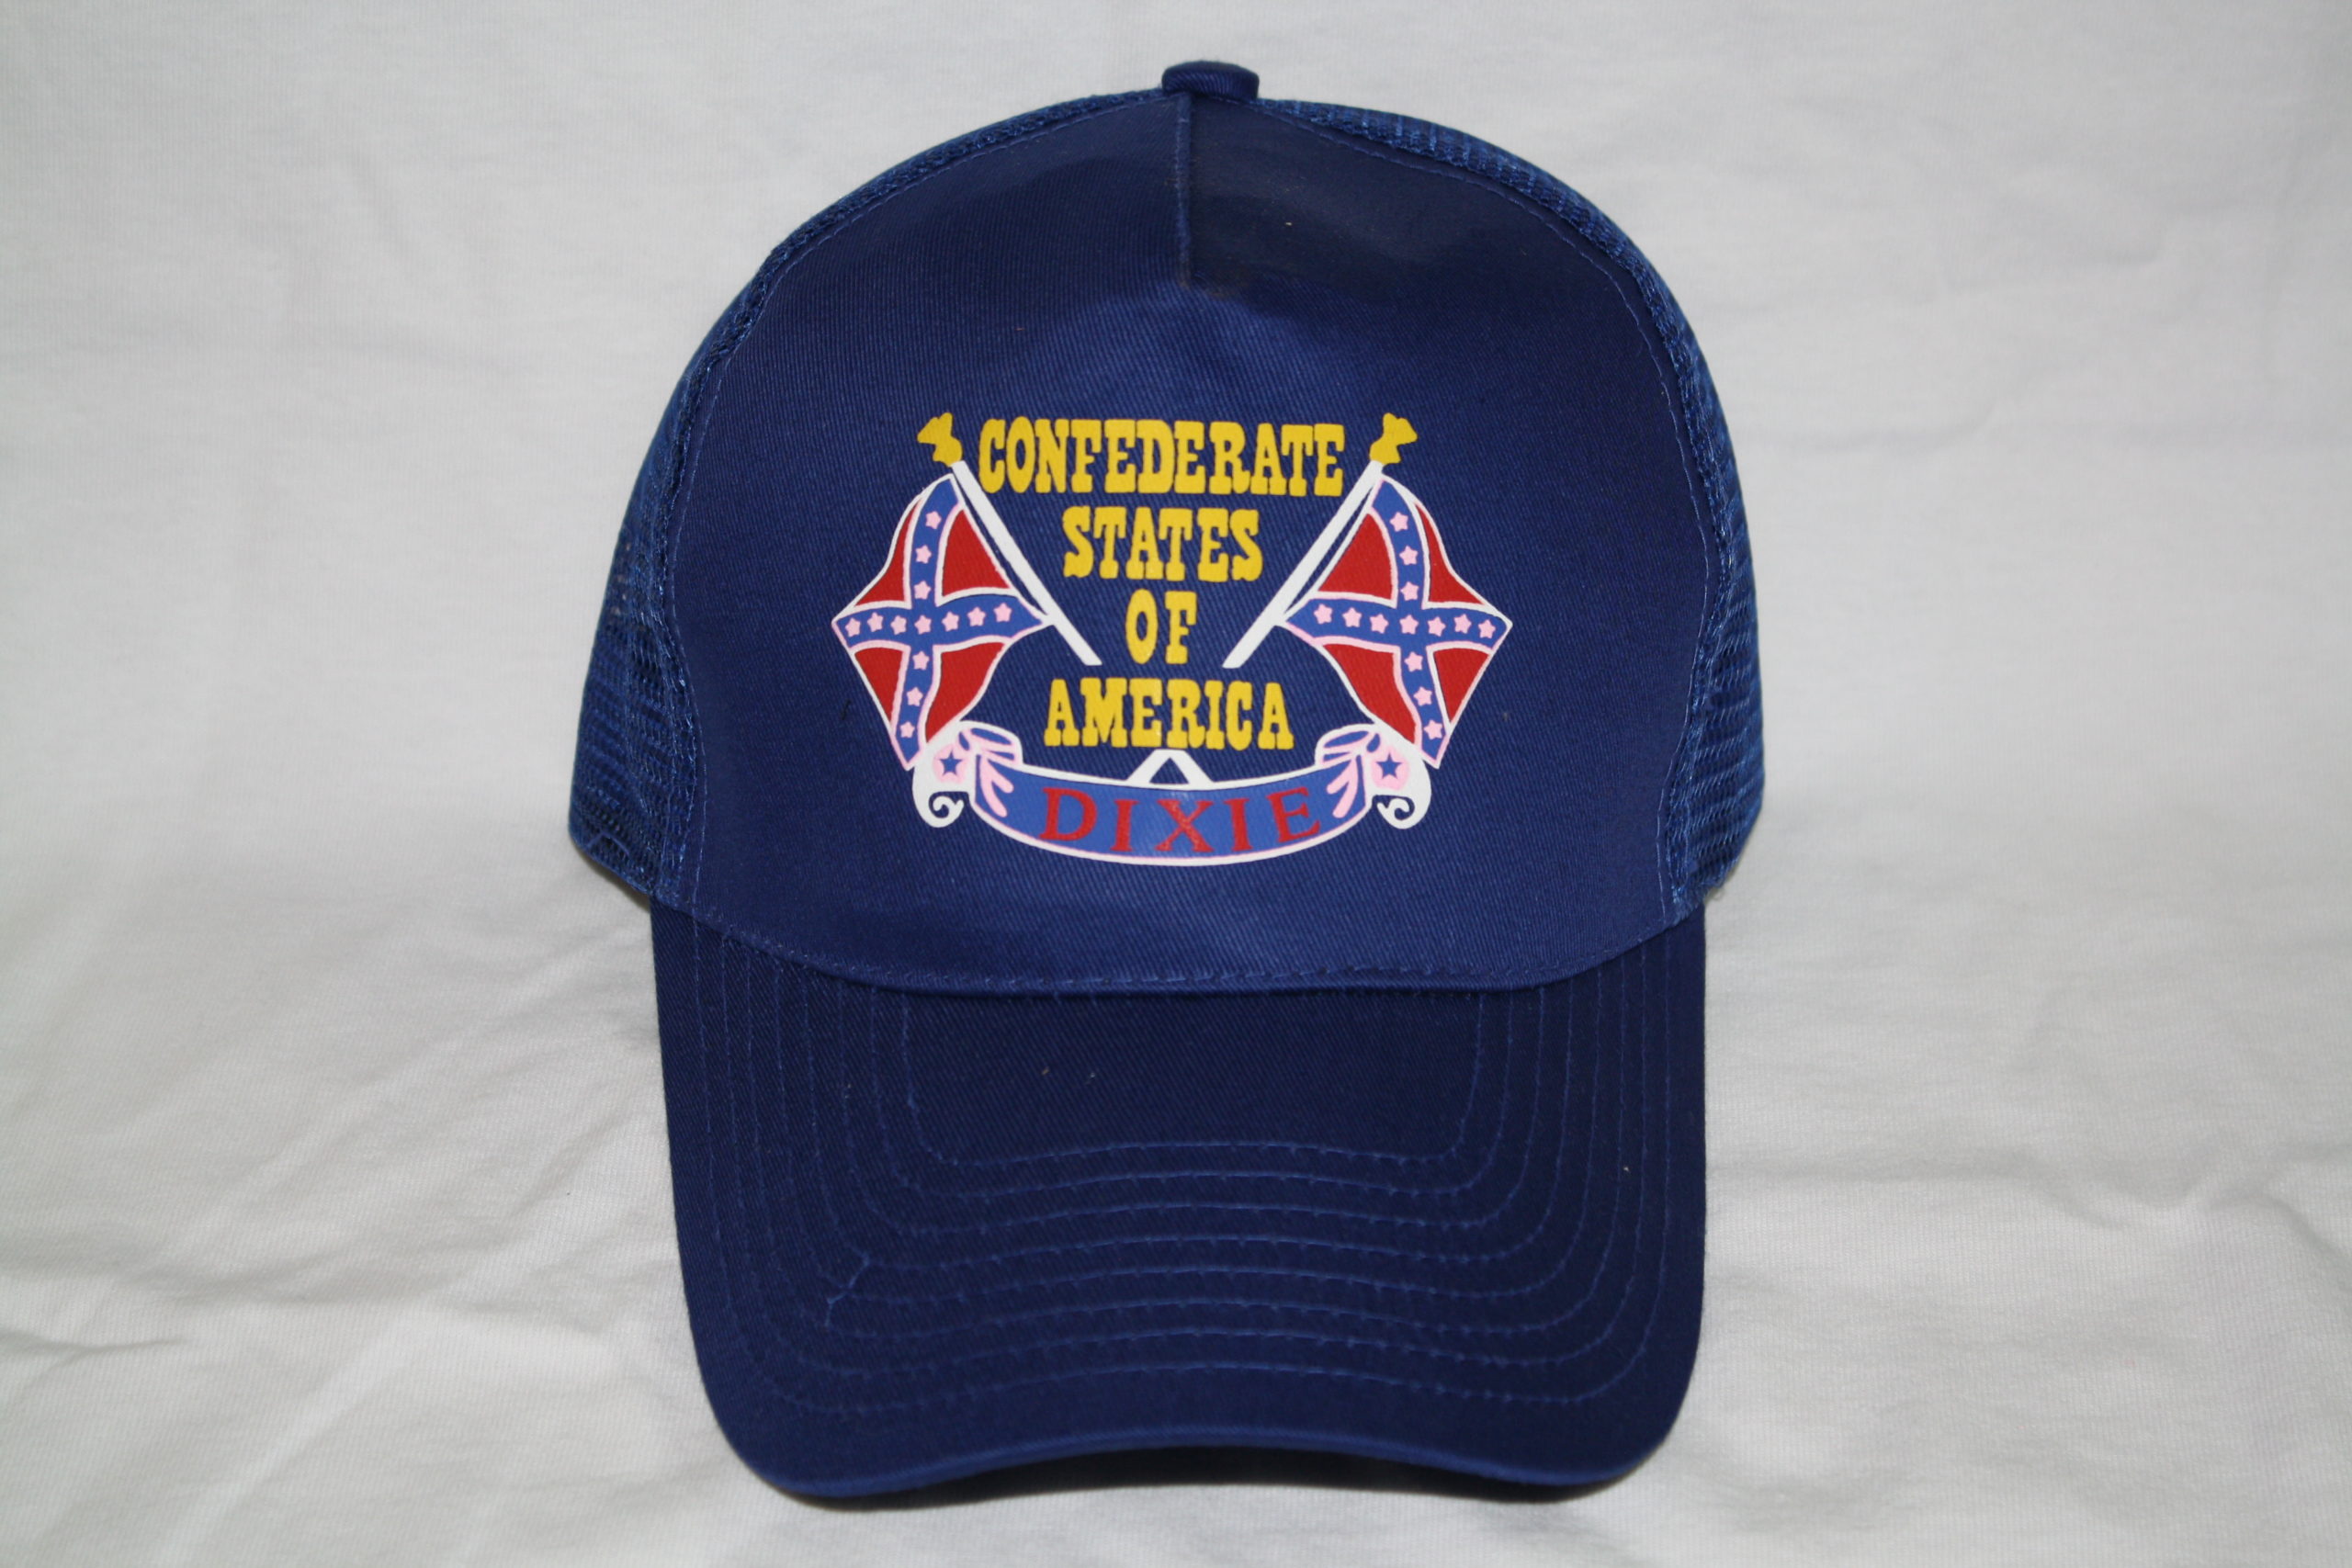 Confederate States of America - Hat (mesh back)